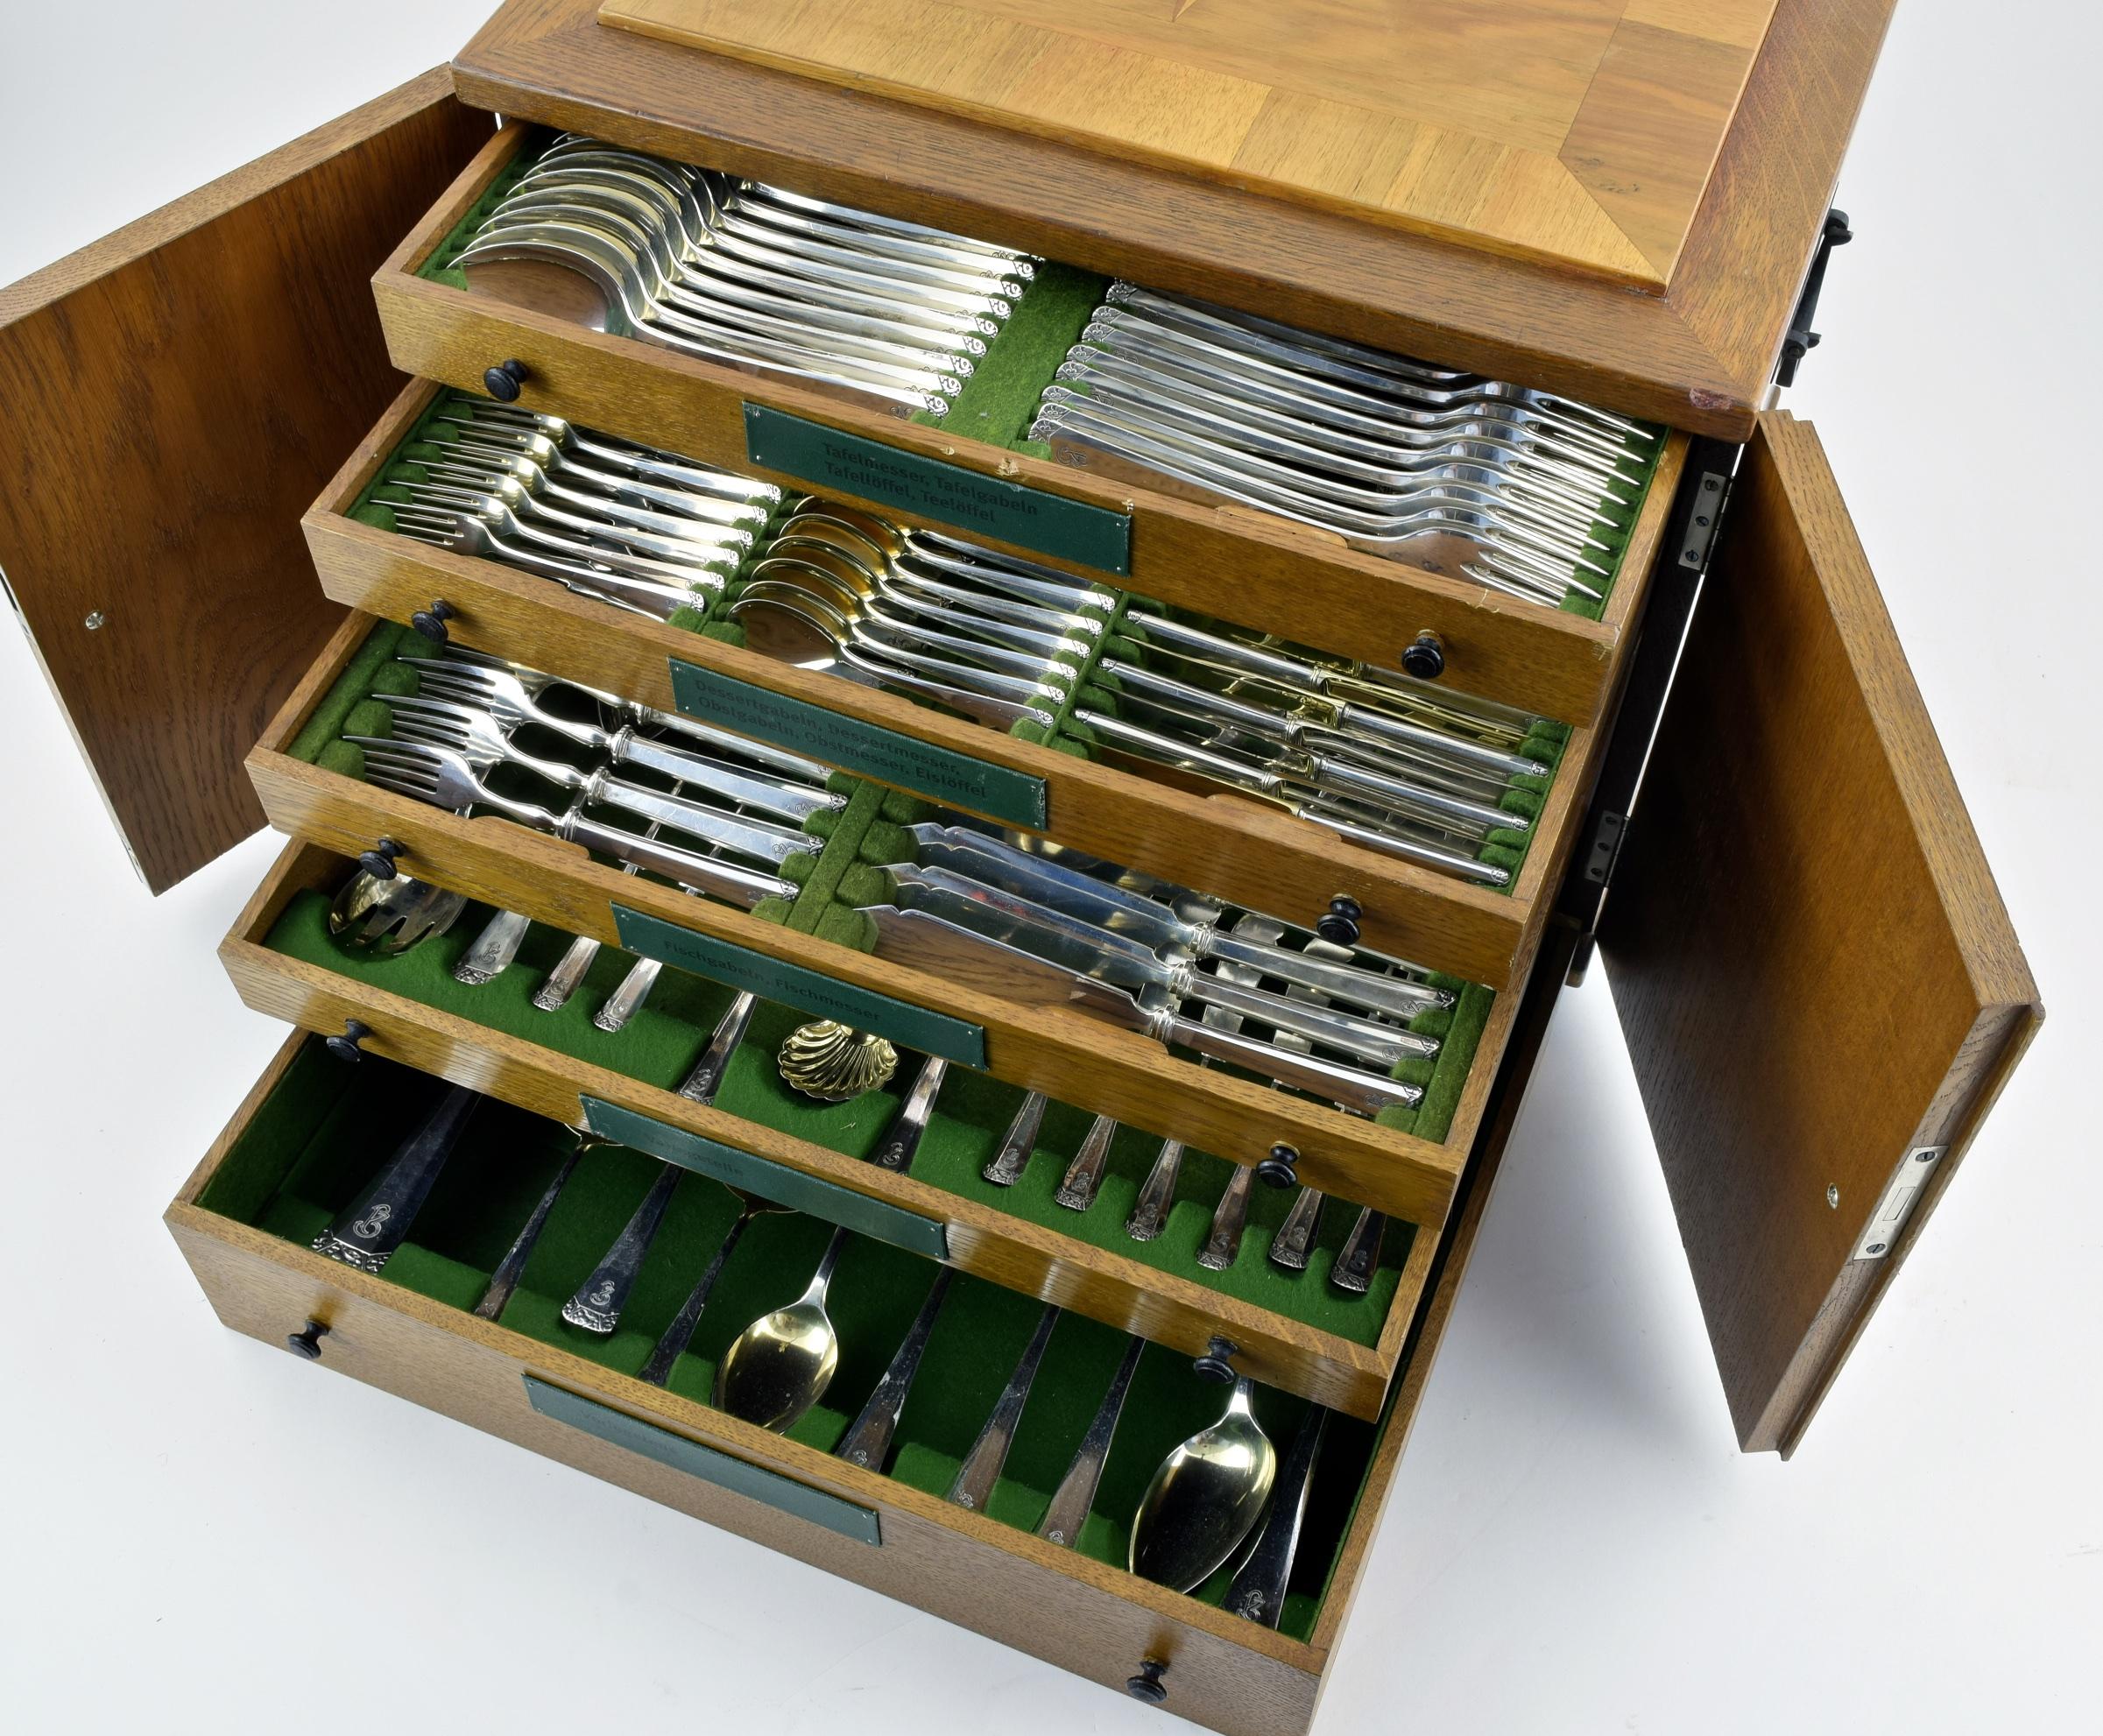 A 158 piece  complete canteen of cutlery for 12. Comprising a 11 piece plate setting with 12 of each of the following - Large tablespoon (for soup), Hors d'oeuvre knifes, Hors d'oeuvre forks, fish knifes, fish forks, dinner knifes, dinner forks,